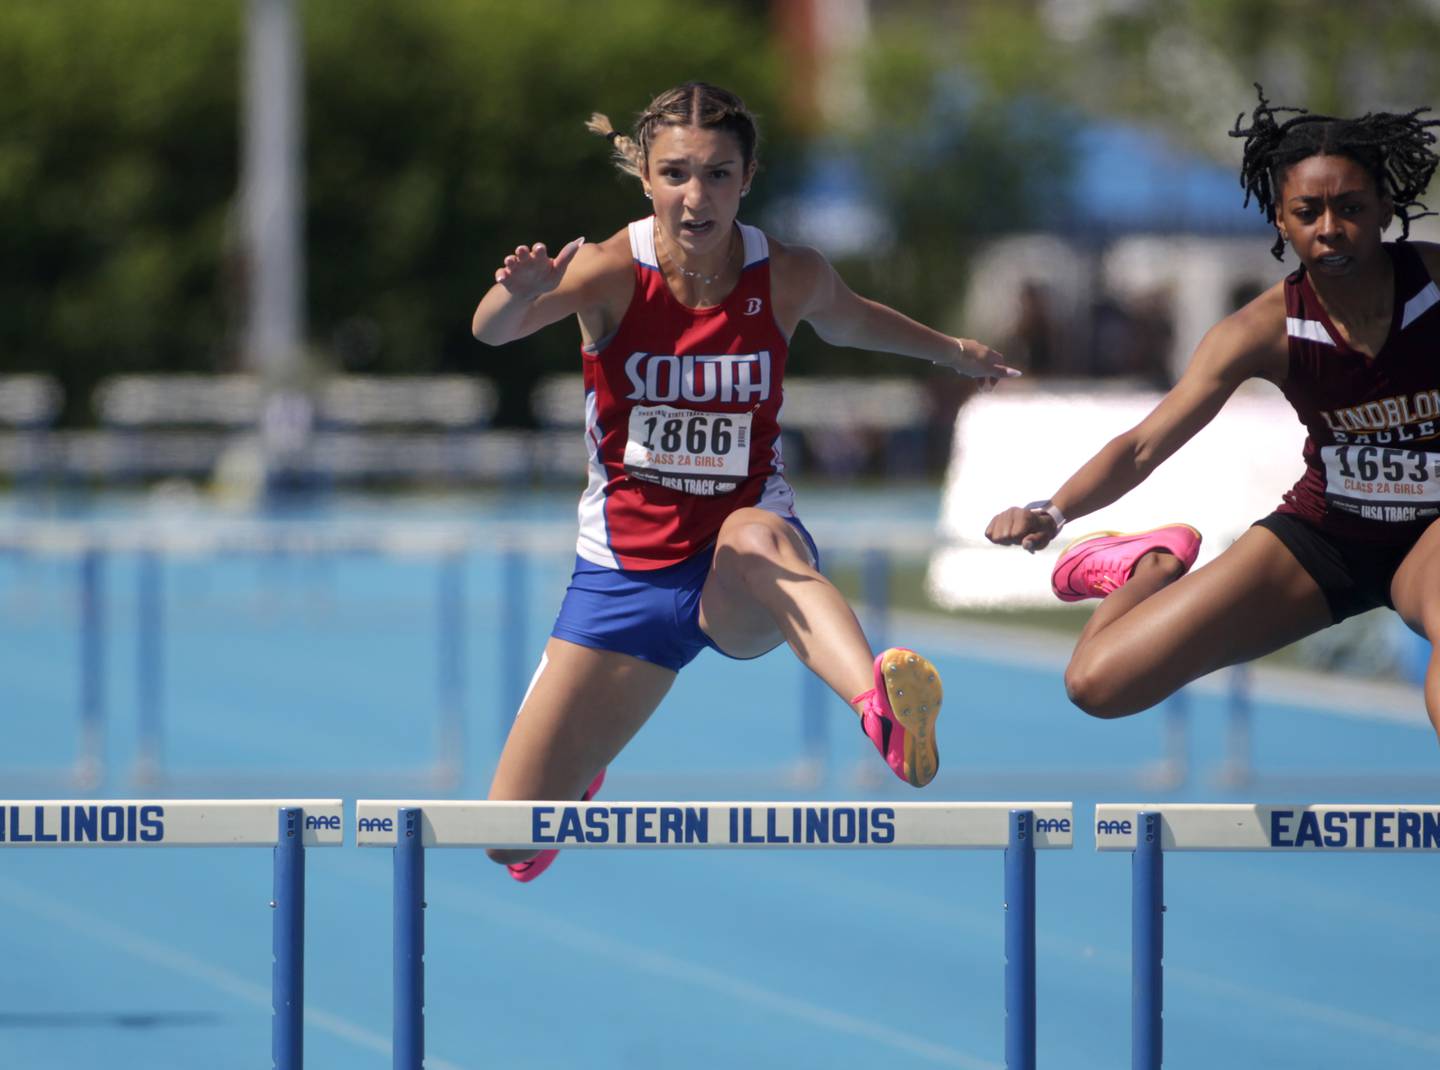 Gianna Huerta of Glenbard South competes in the 2A 300-meter hurles during the IHSA State Track and Field Finals at Eastern Illinois University in Charleston on Saturday, May 20, 2023.